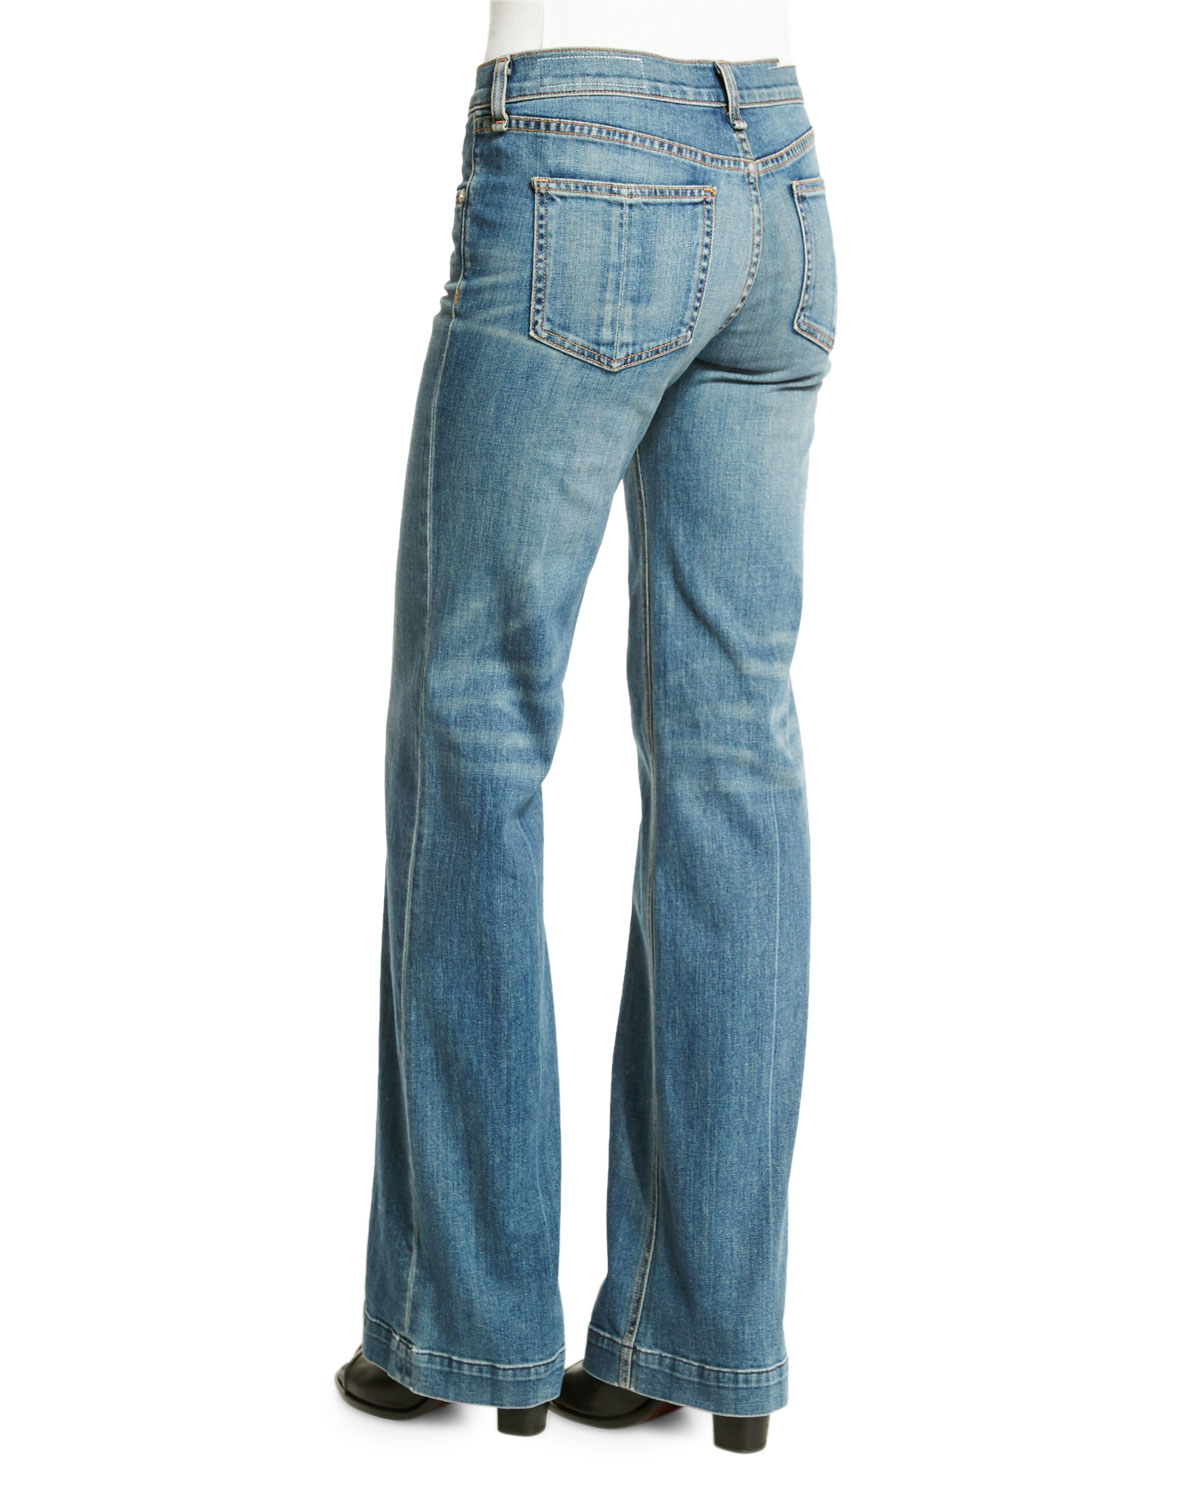 Vintage guess high rise jeans georges marciano